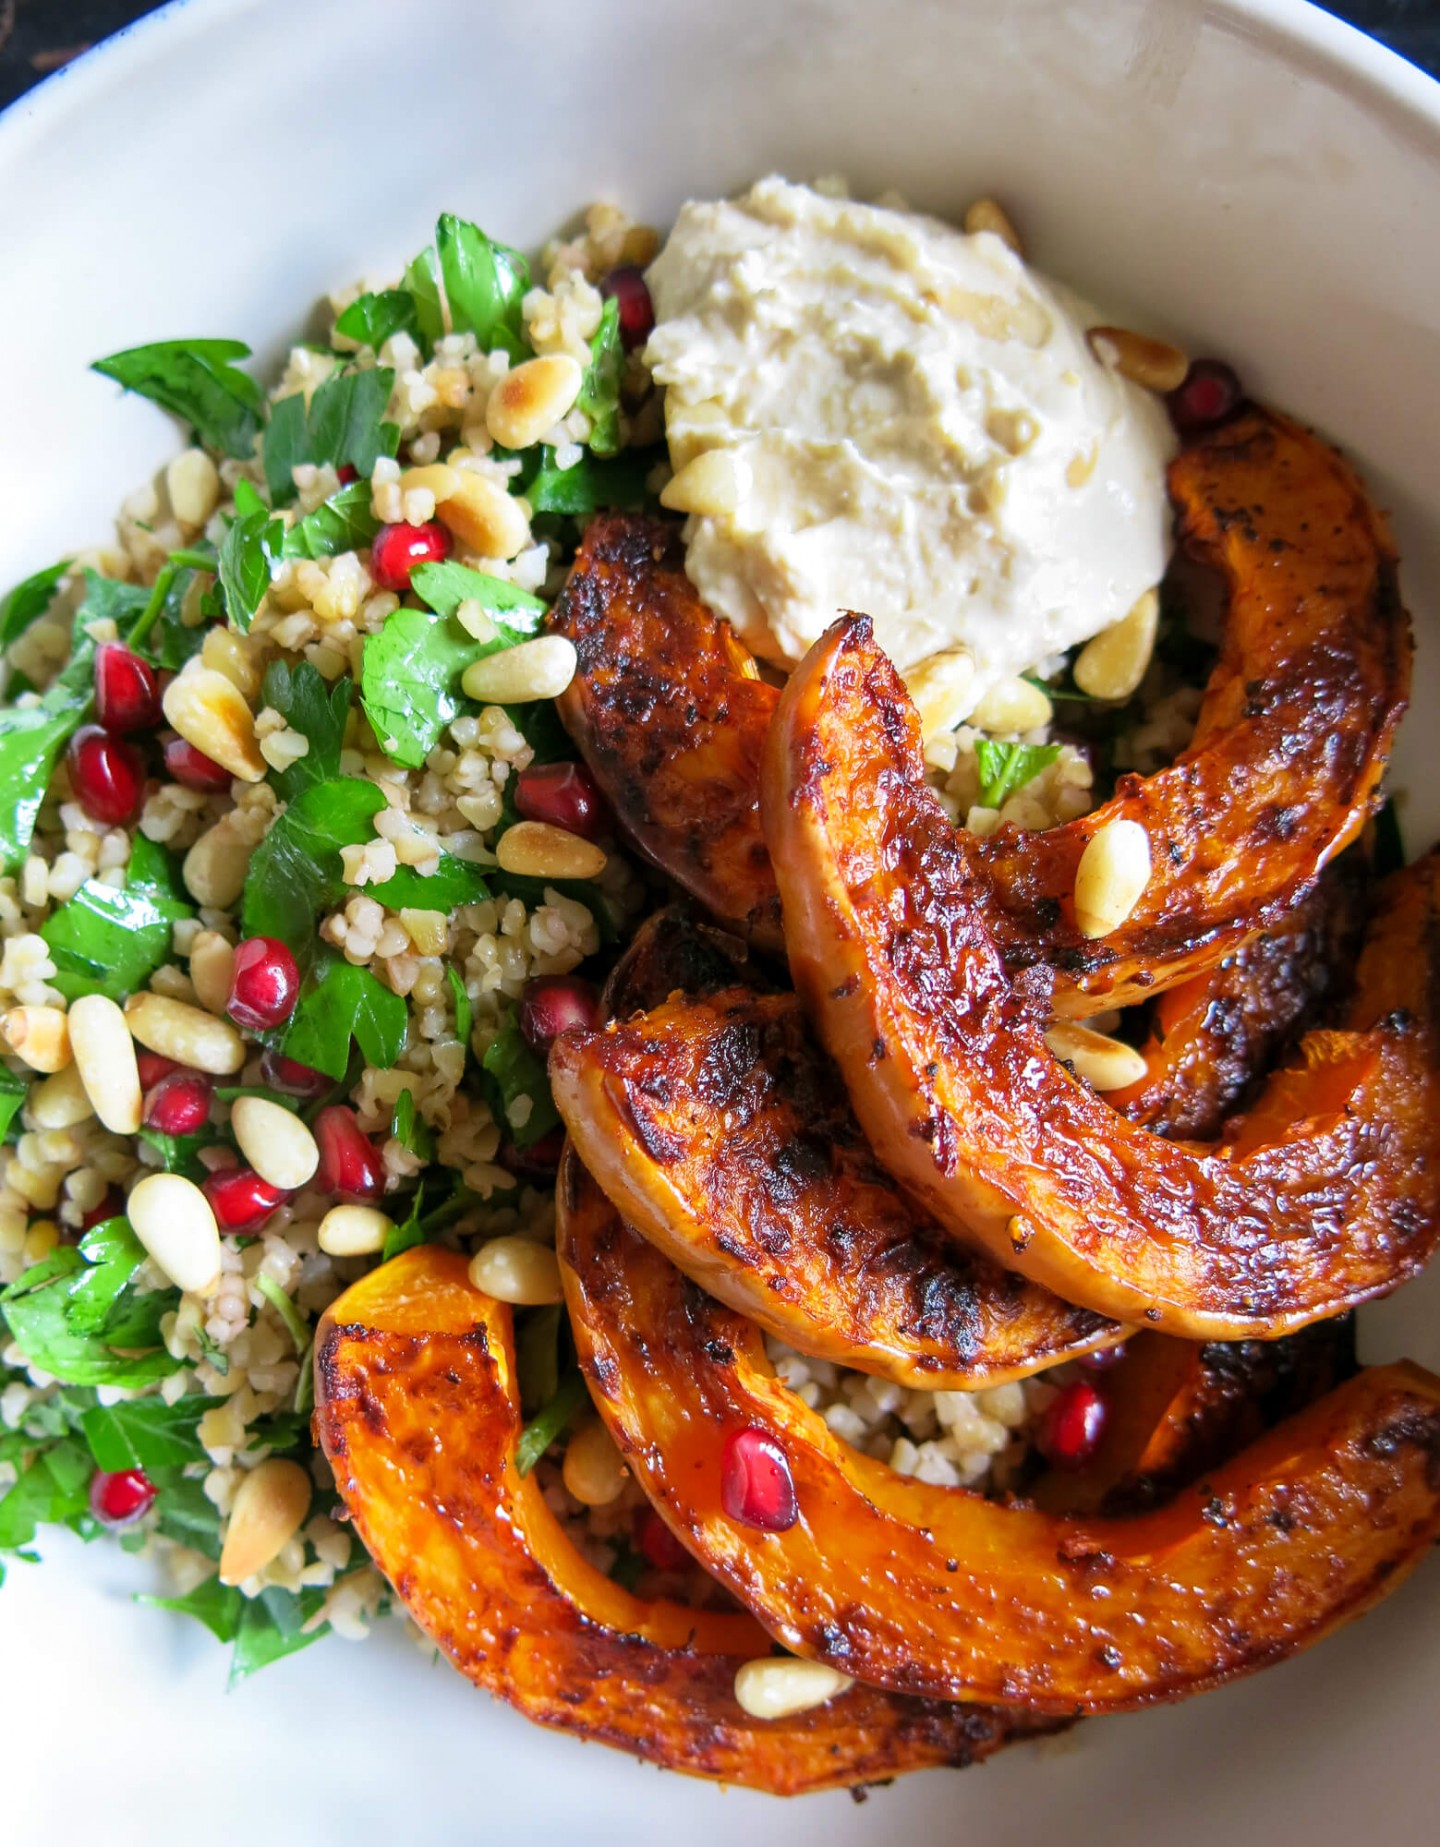 A quick and easy vegetarian salad recipe. Includes butternut squash, bulgar wheat, harrisa, pomegranate and pine nuts.